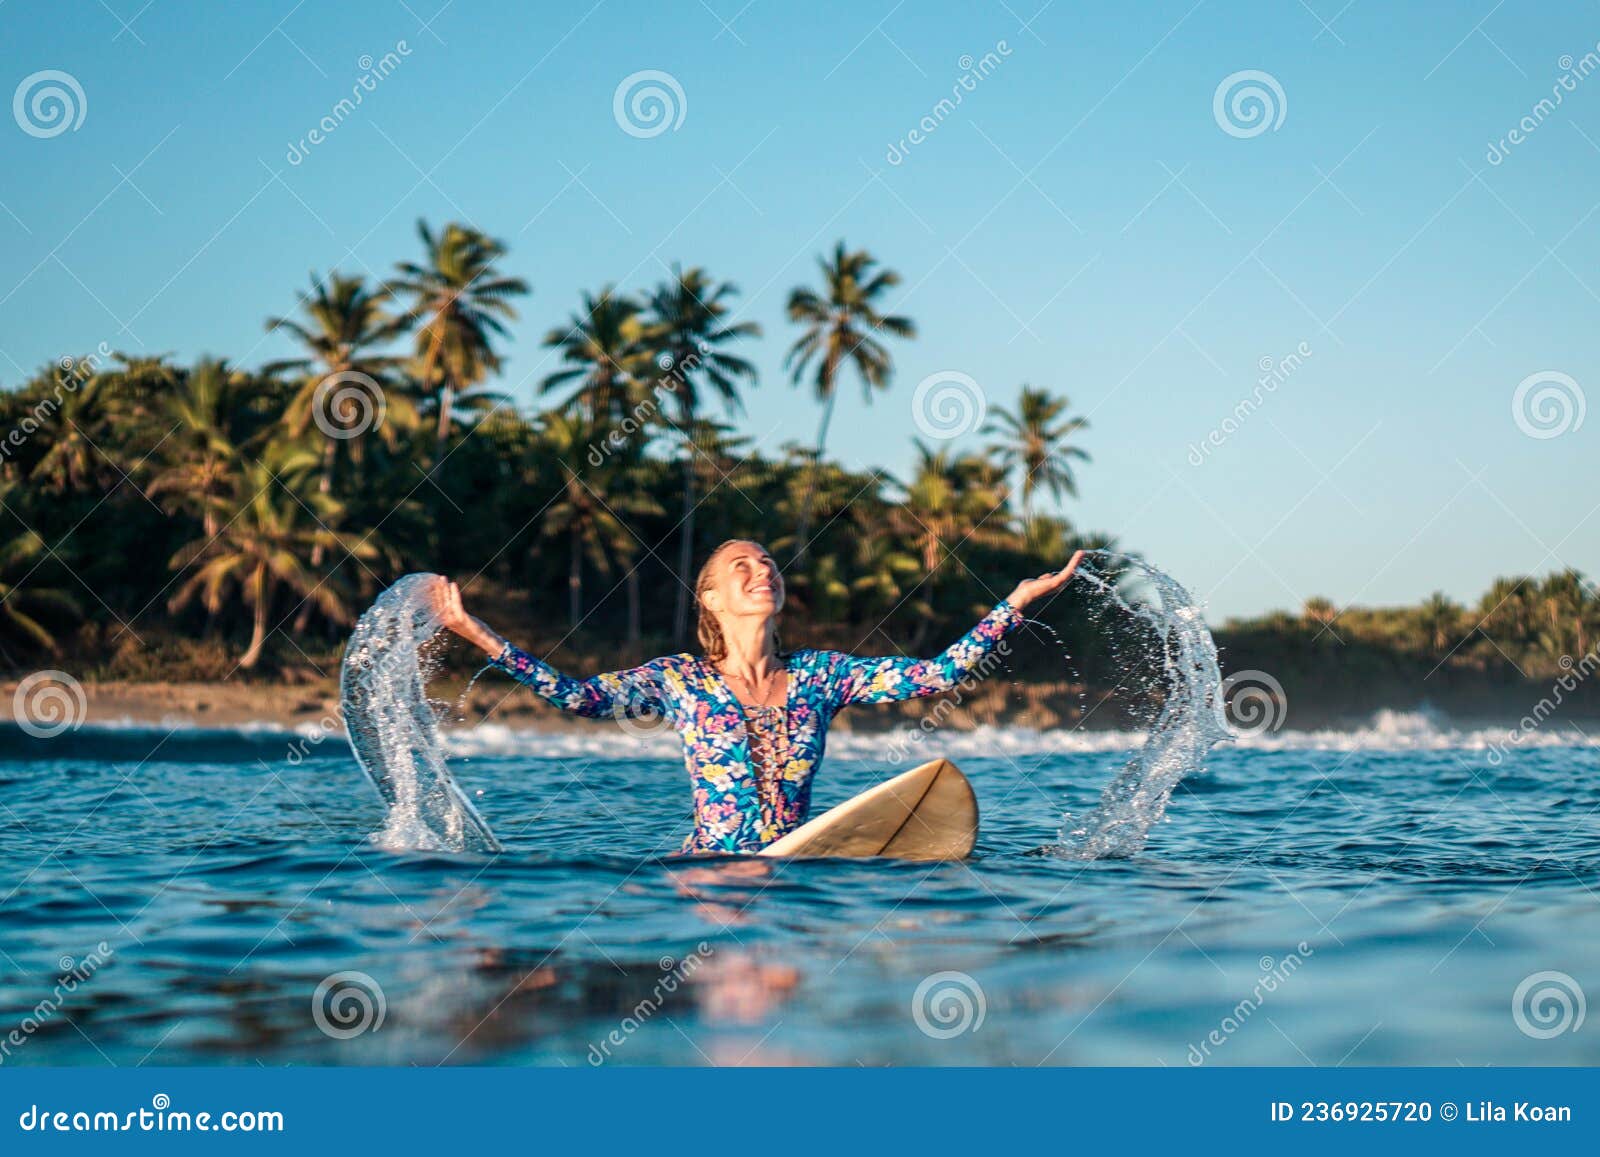 portrait of blond surfer girl on white surf board in blue ocean pictured from the water in encuentro beach